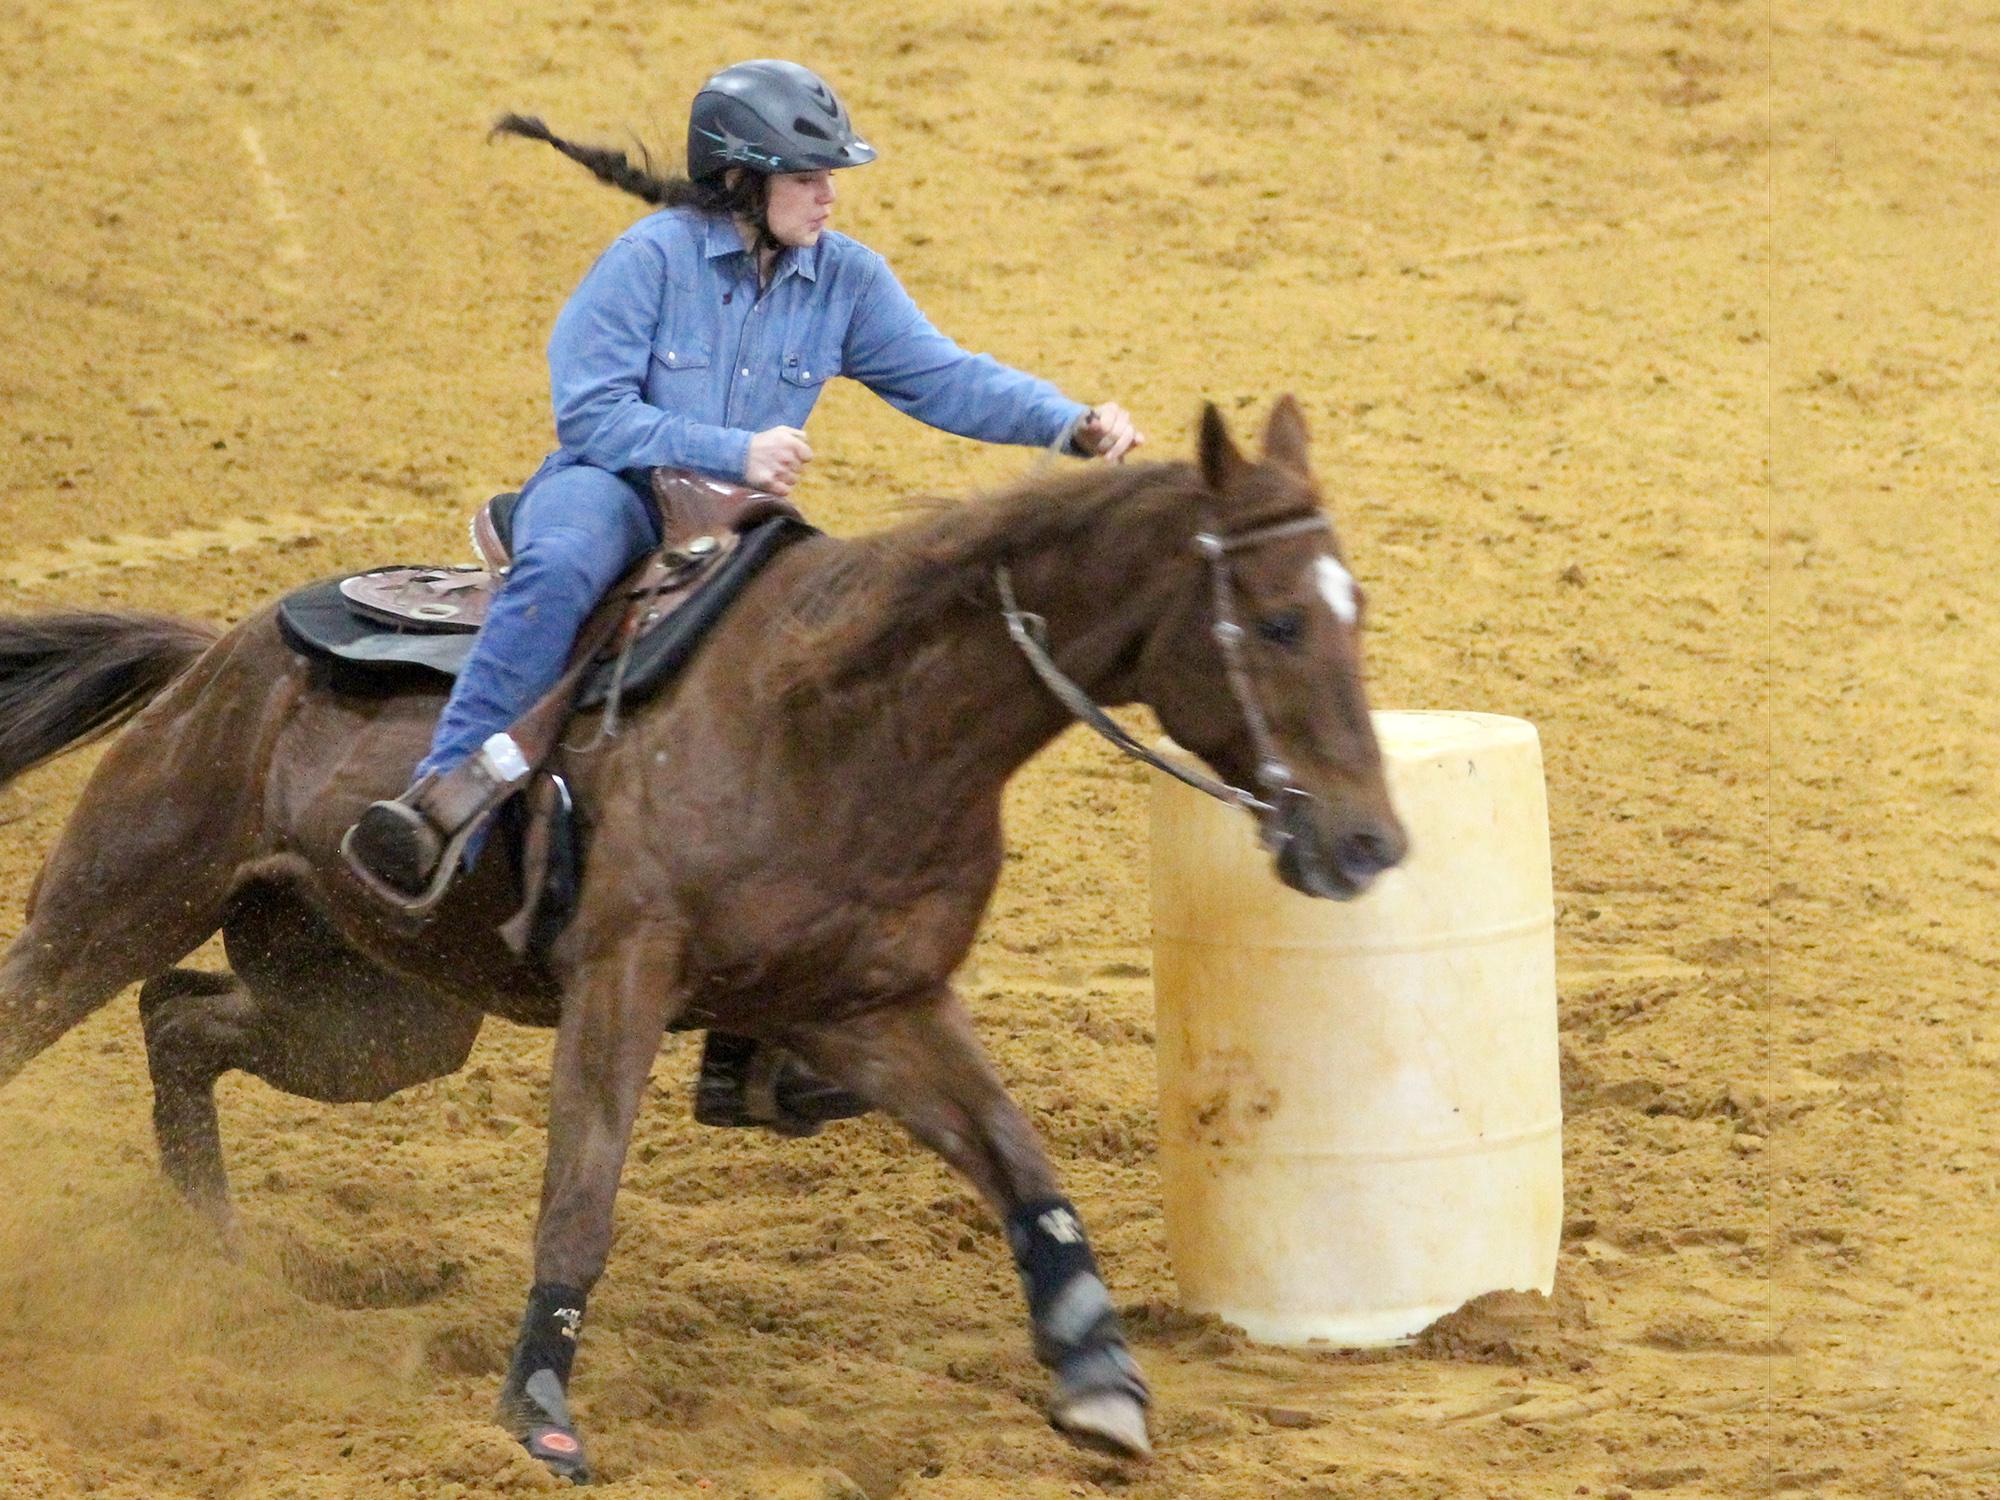 Anna Katherine Hosket, a member of the Mississippi State University Extension Service 4-H program in Choctaw County, runs barrels in the 2017 4-H Winter Classic horse show series. Show organizers and participants celebrated the event’s 10th anniversary on March 31. (Photo courtesy of Gina Wills)